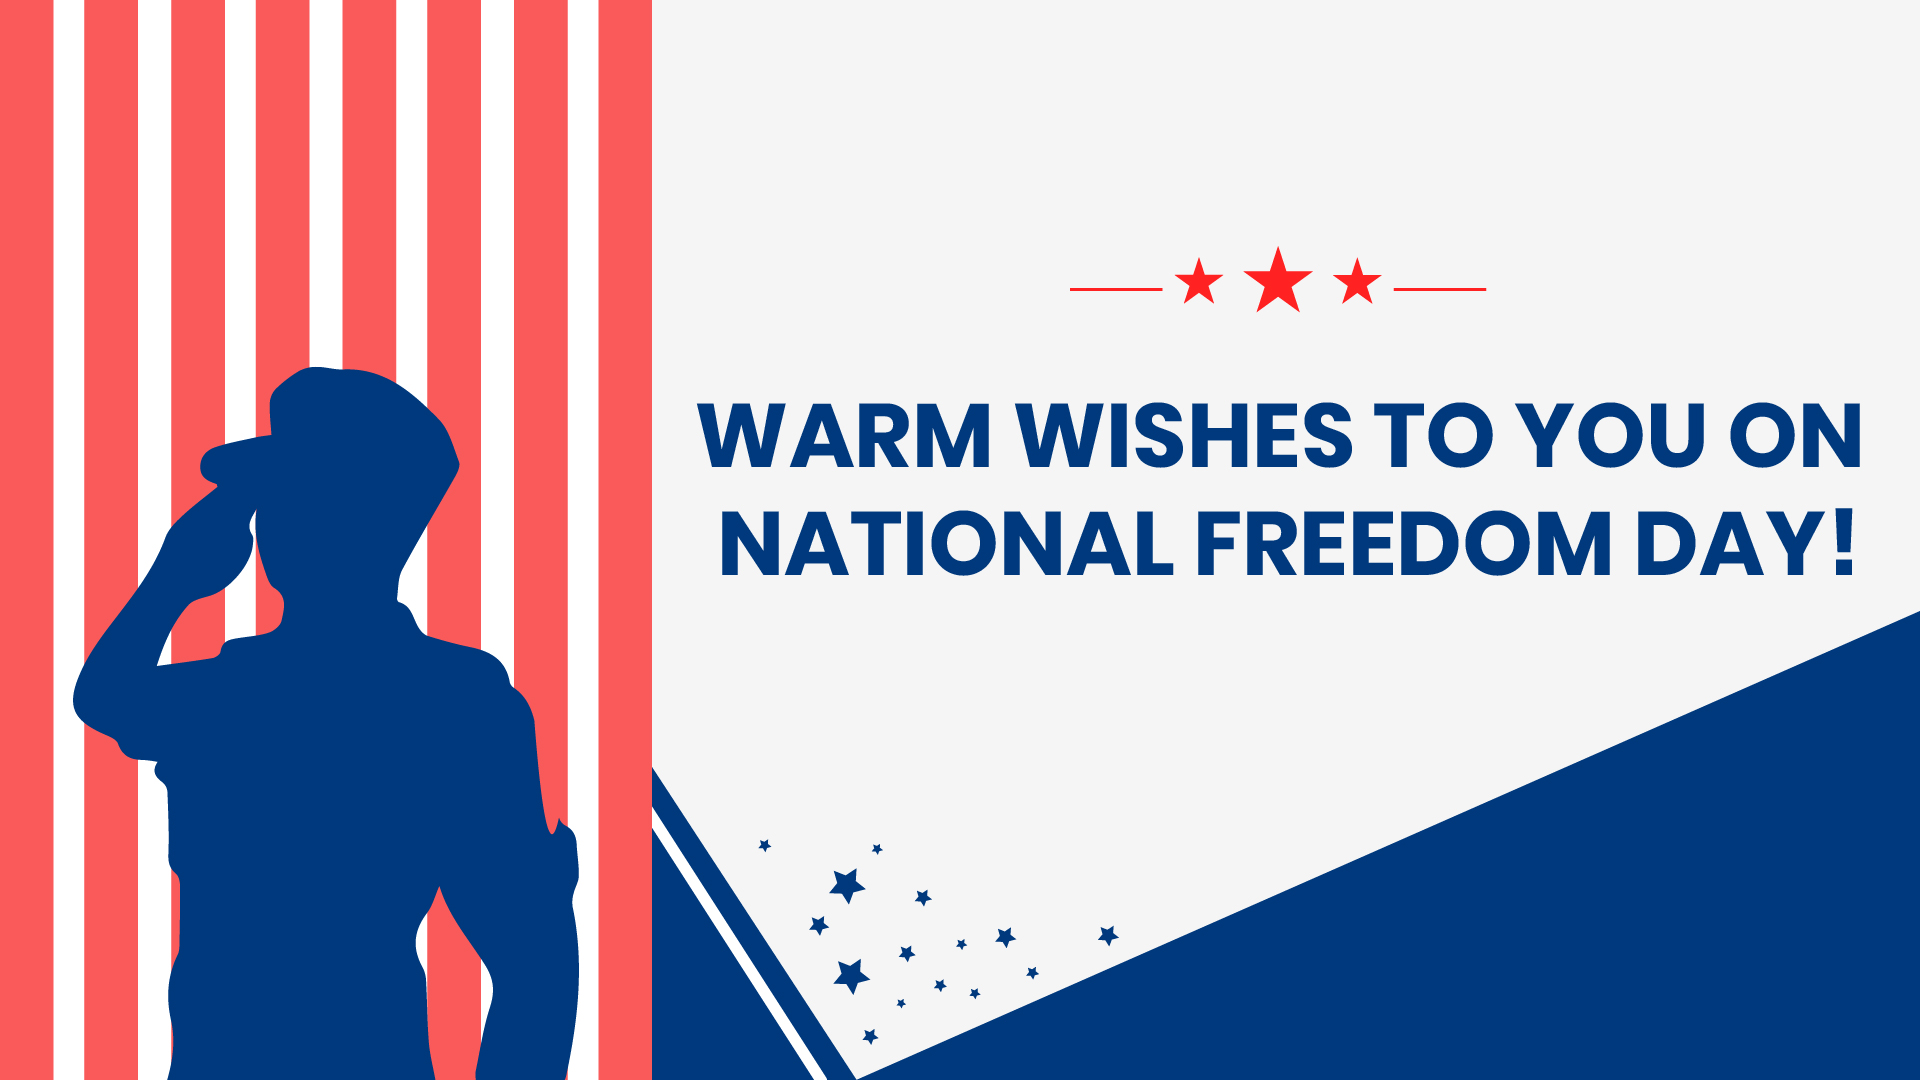 National Freedom Day Wishes Background